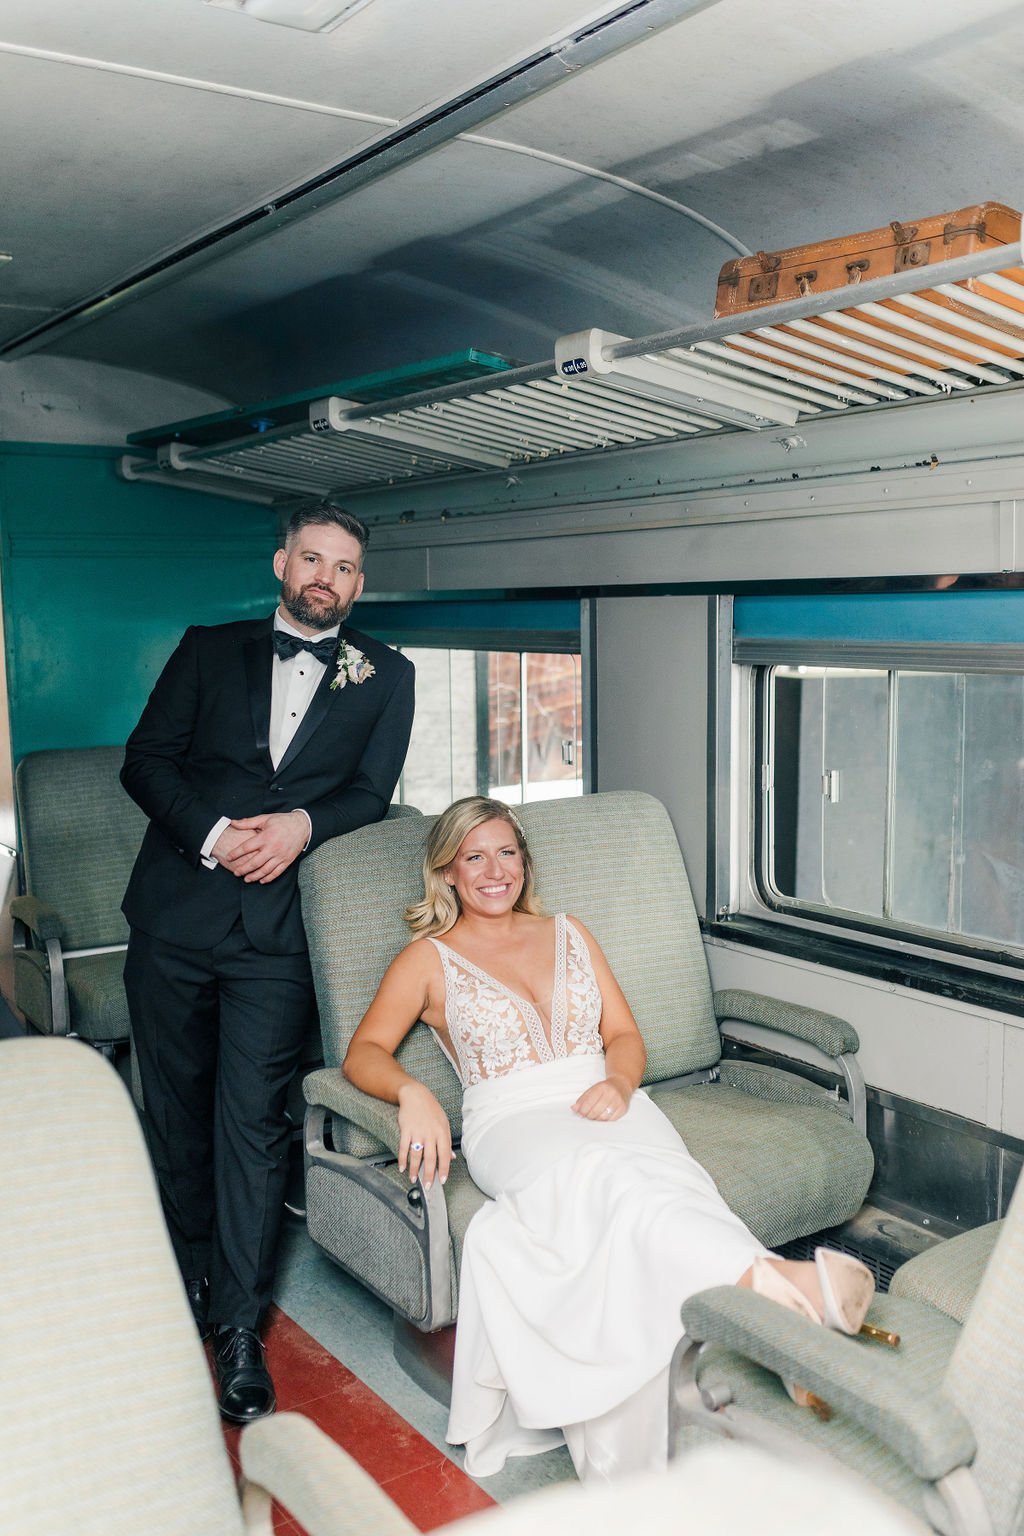 claudia-and-travis-romantic-southern-wedding-at-the-georgia-state-railroad-museum-in-savannah-georgia-planned-by-savannah-wedding-planner-and-savannah-florist-ivory-and-beau-7.jpg